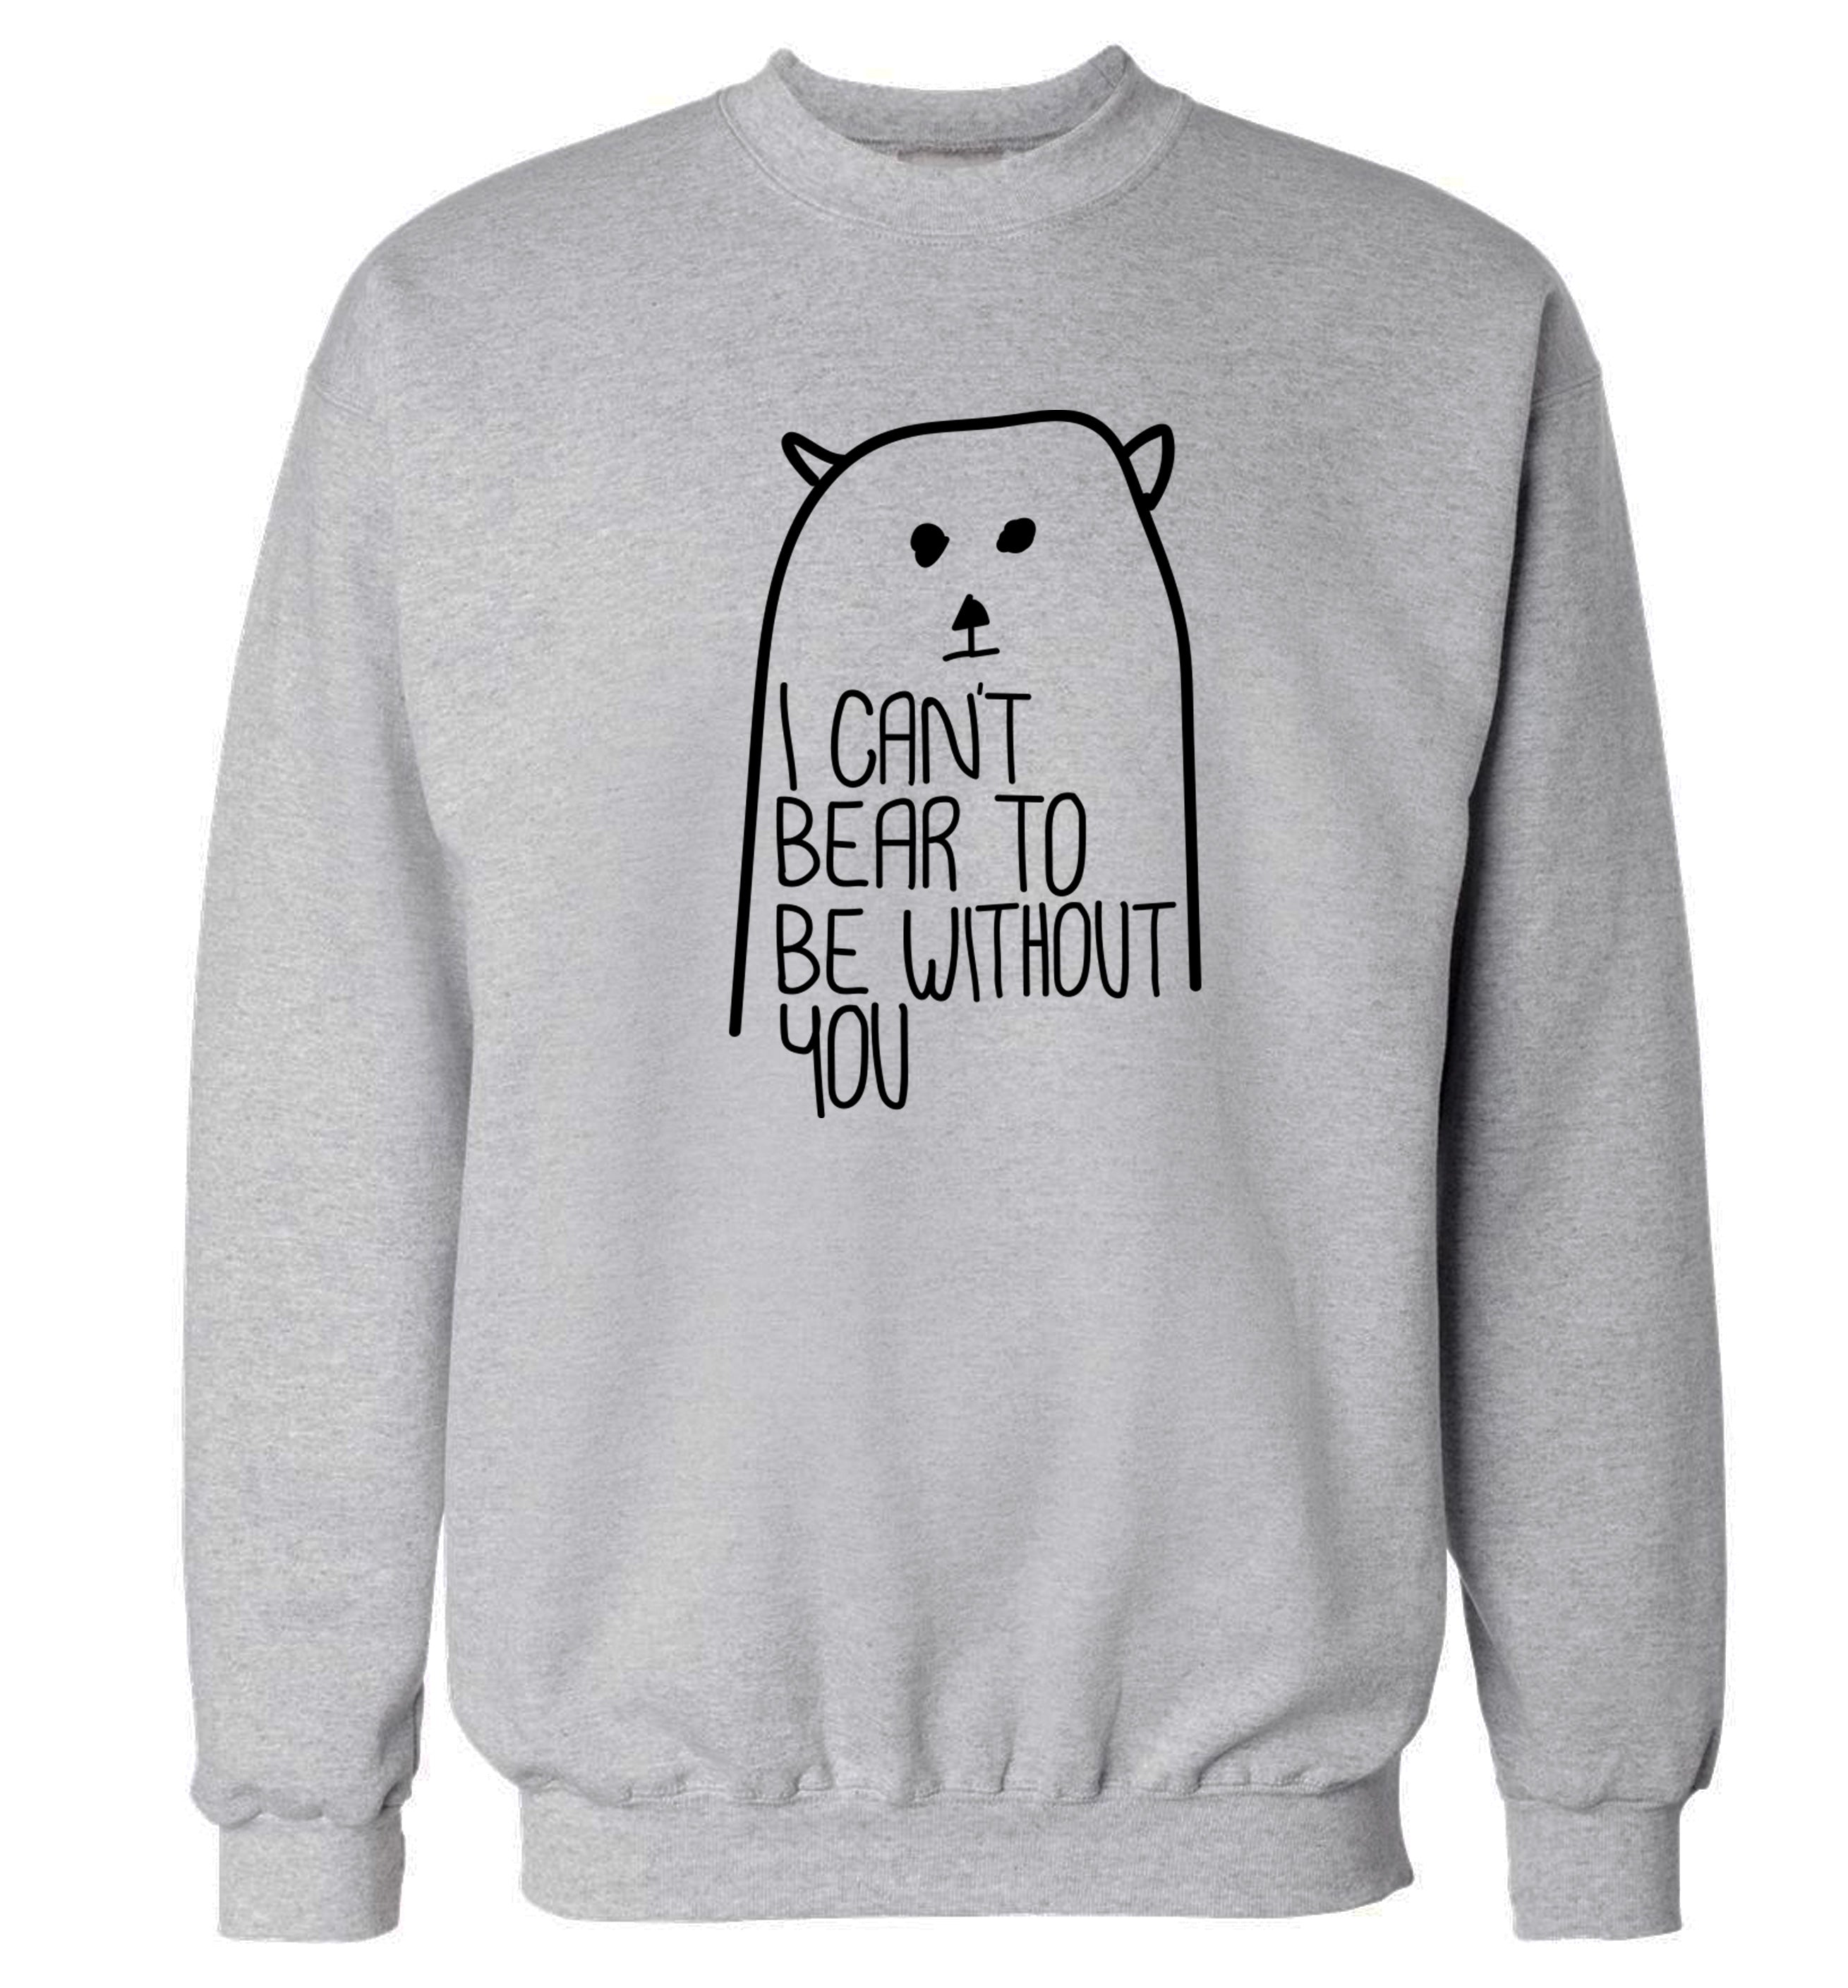 i can't bear to be without you sweater